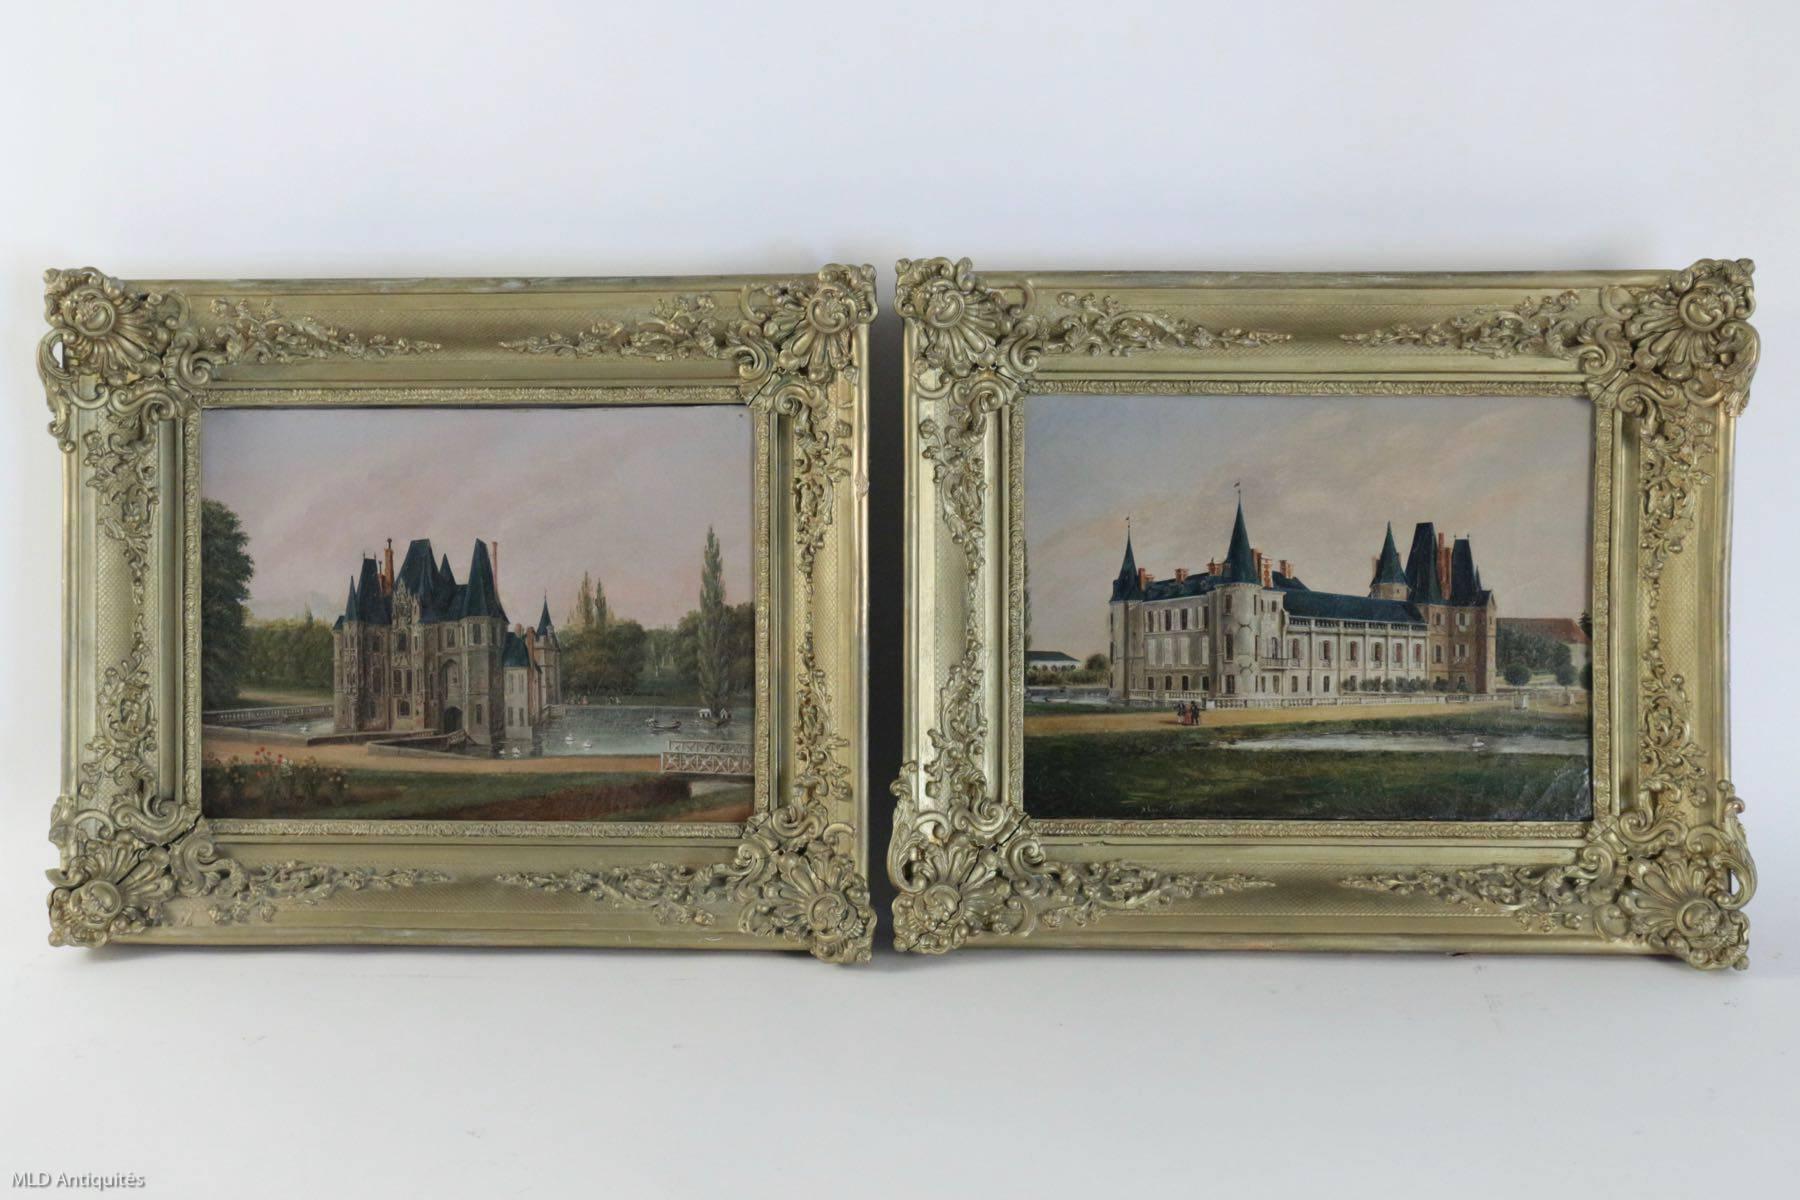 Lovely French Romantic period pair of oil on canvas, depict Castel of 'Ô views'.
Our paintings are signed HD and dated December 1839 and January 1840.

Early 19th century, French Romantic period dated 1839 and 1840.

Original canvas and guilt